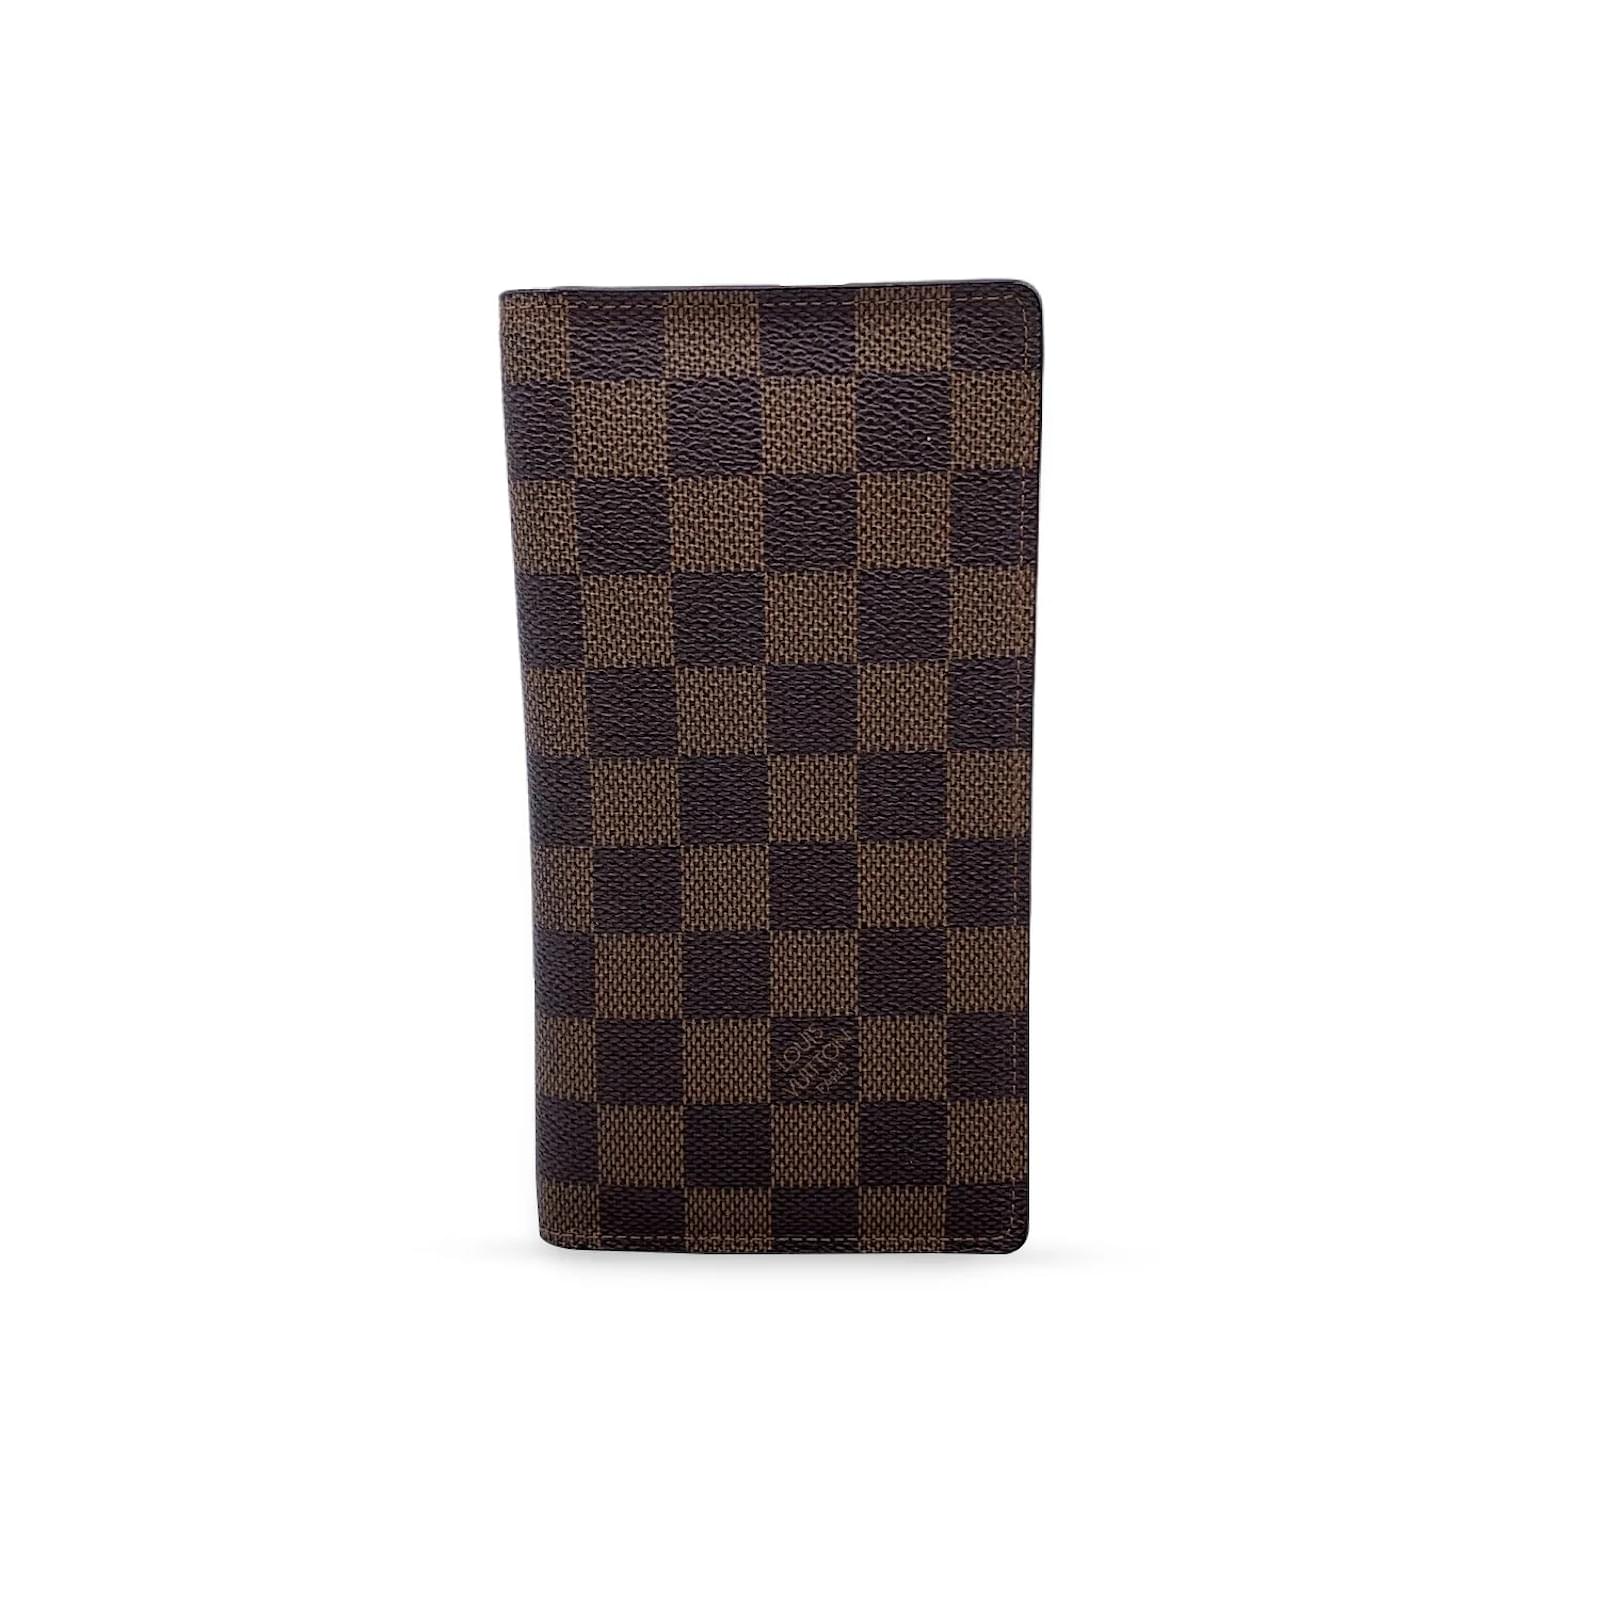 serial number real louis vuitton wallet inside